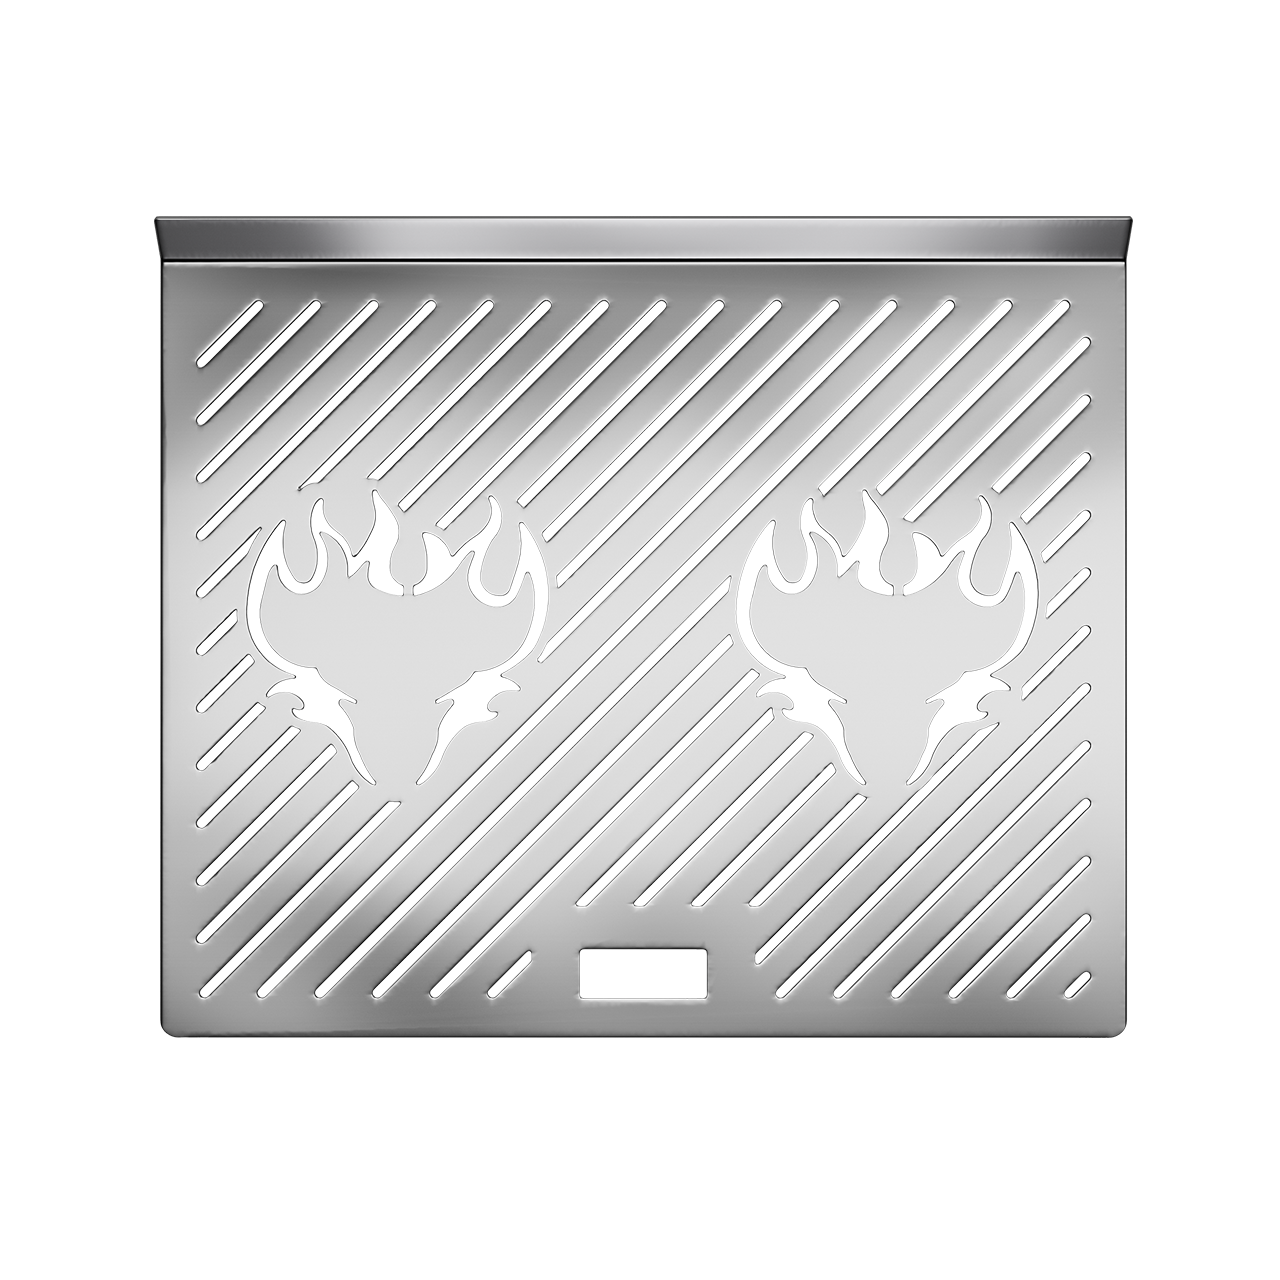 Blazing Bull Grill Grate - Top View